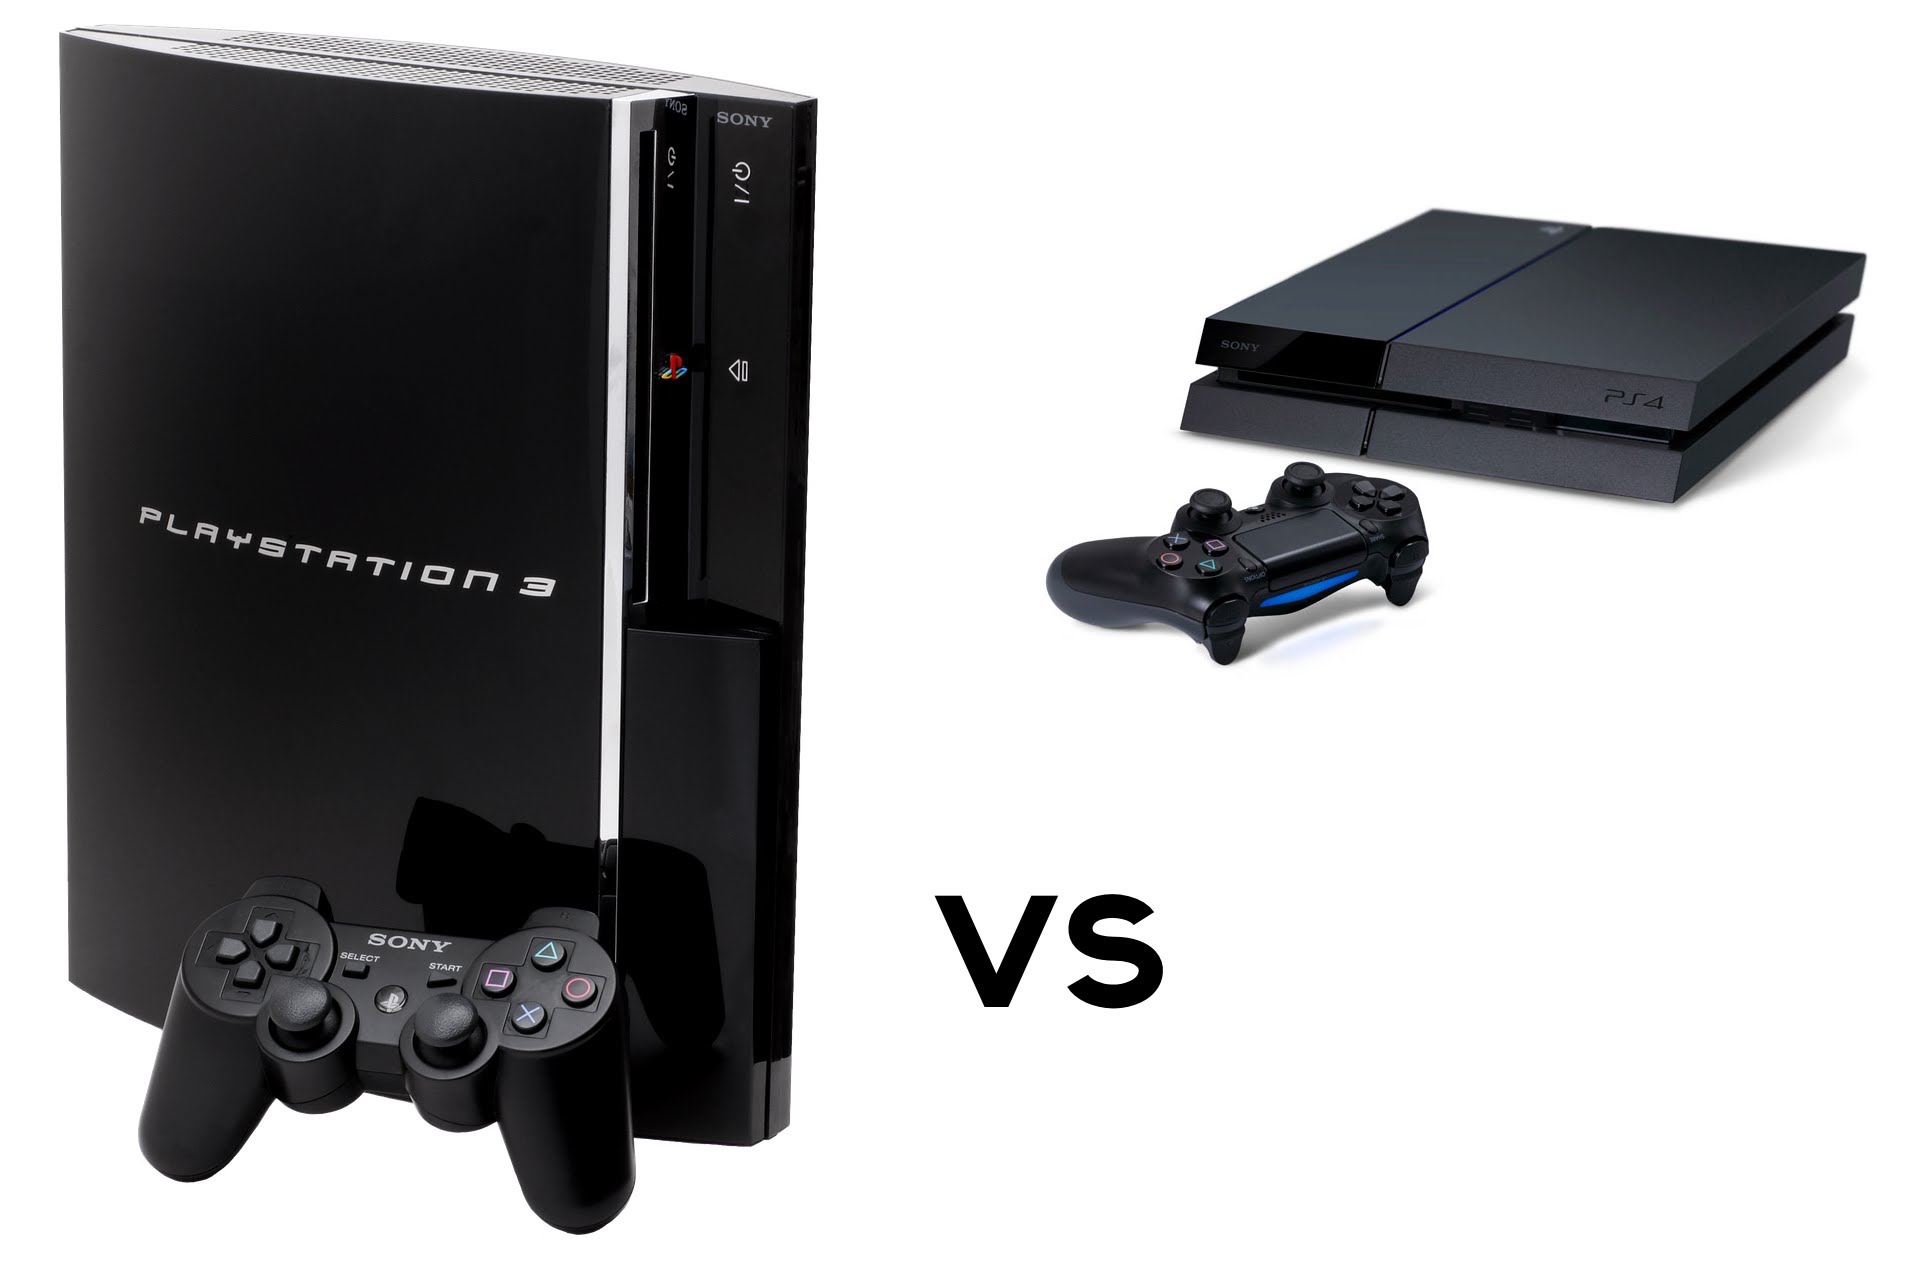 Sony playstation когда вышла. PS ps2 ps3 ps4 PS 5. Процессор плейстейшен 3. Ps1 ps2 ps3 ps4 ps5. PLAYSTATION 3 PLAYSTATION 4.